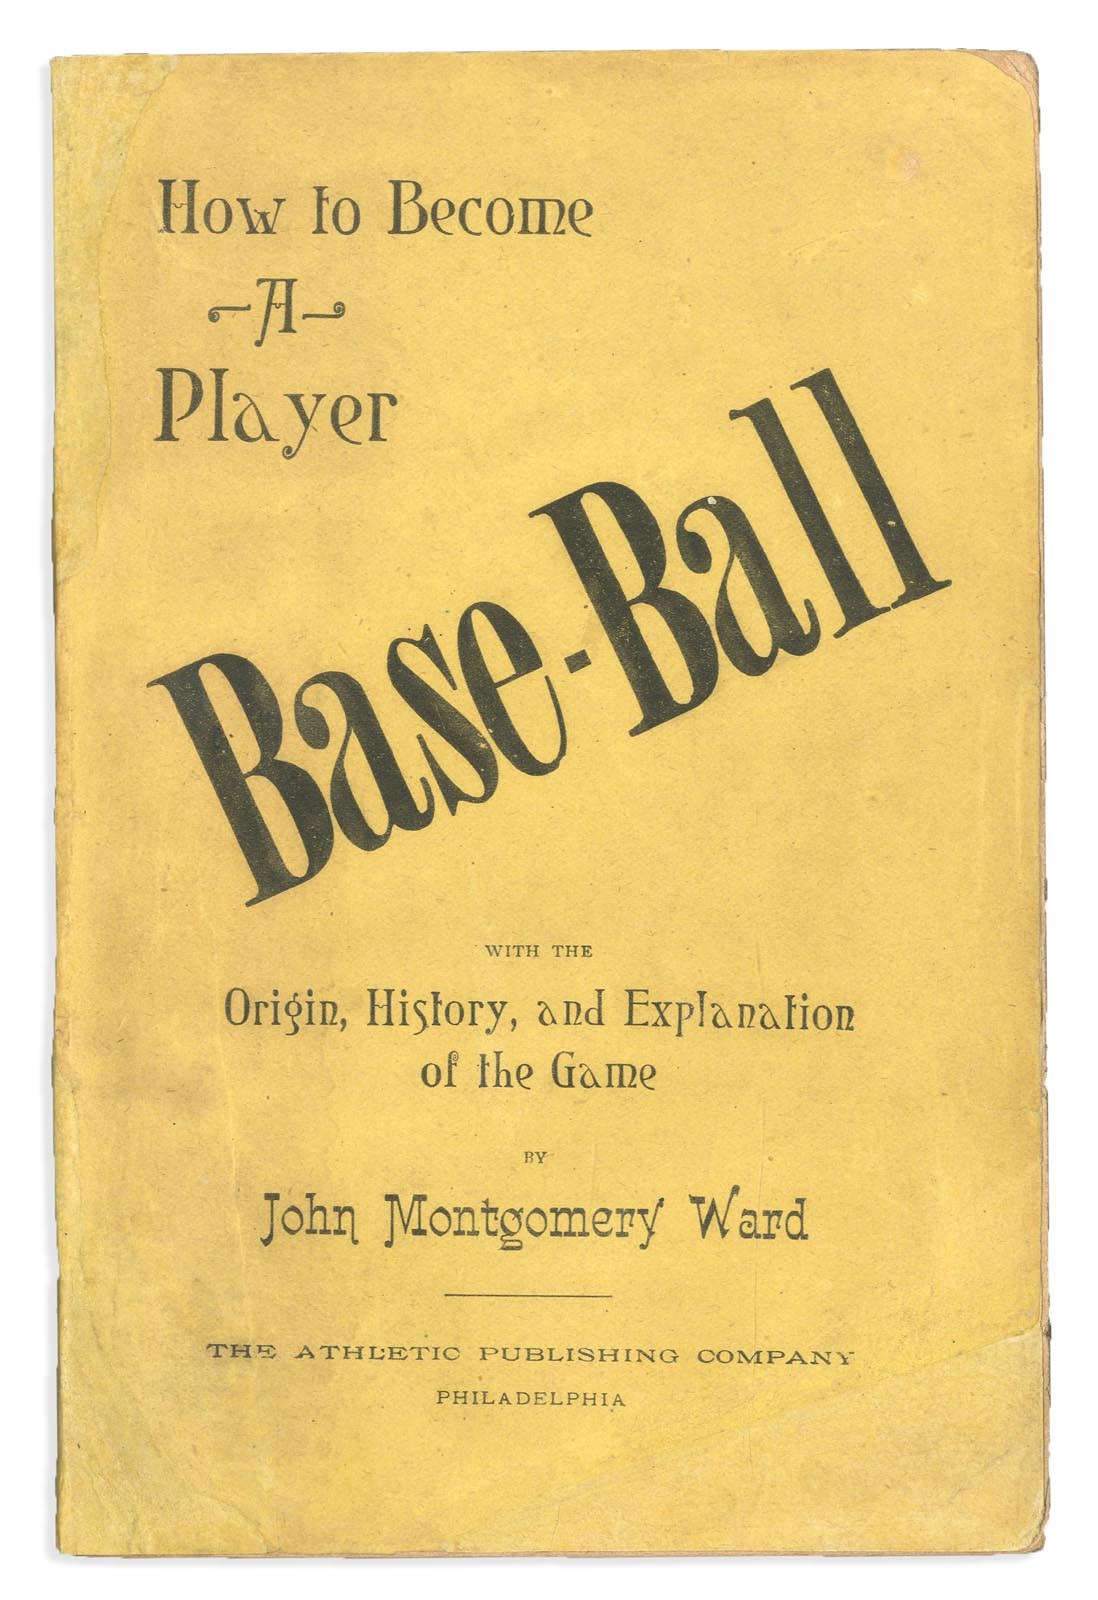 - 1888 "How to Become a Player" by John Montgomery Ward